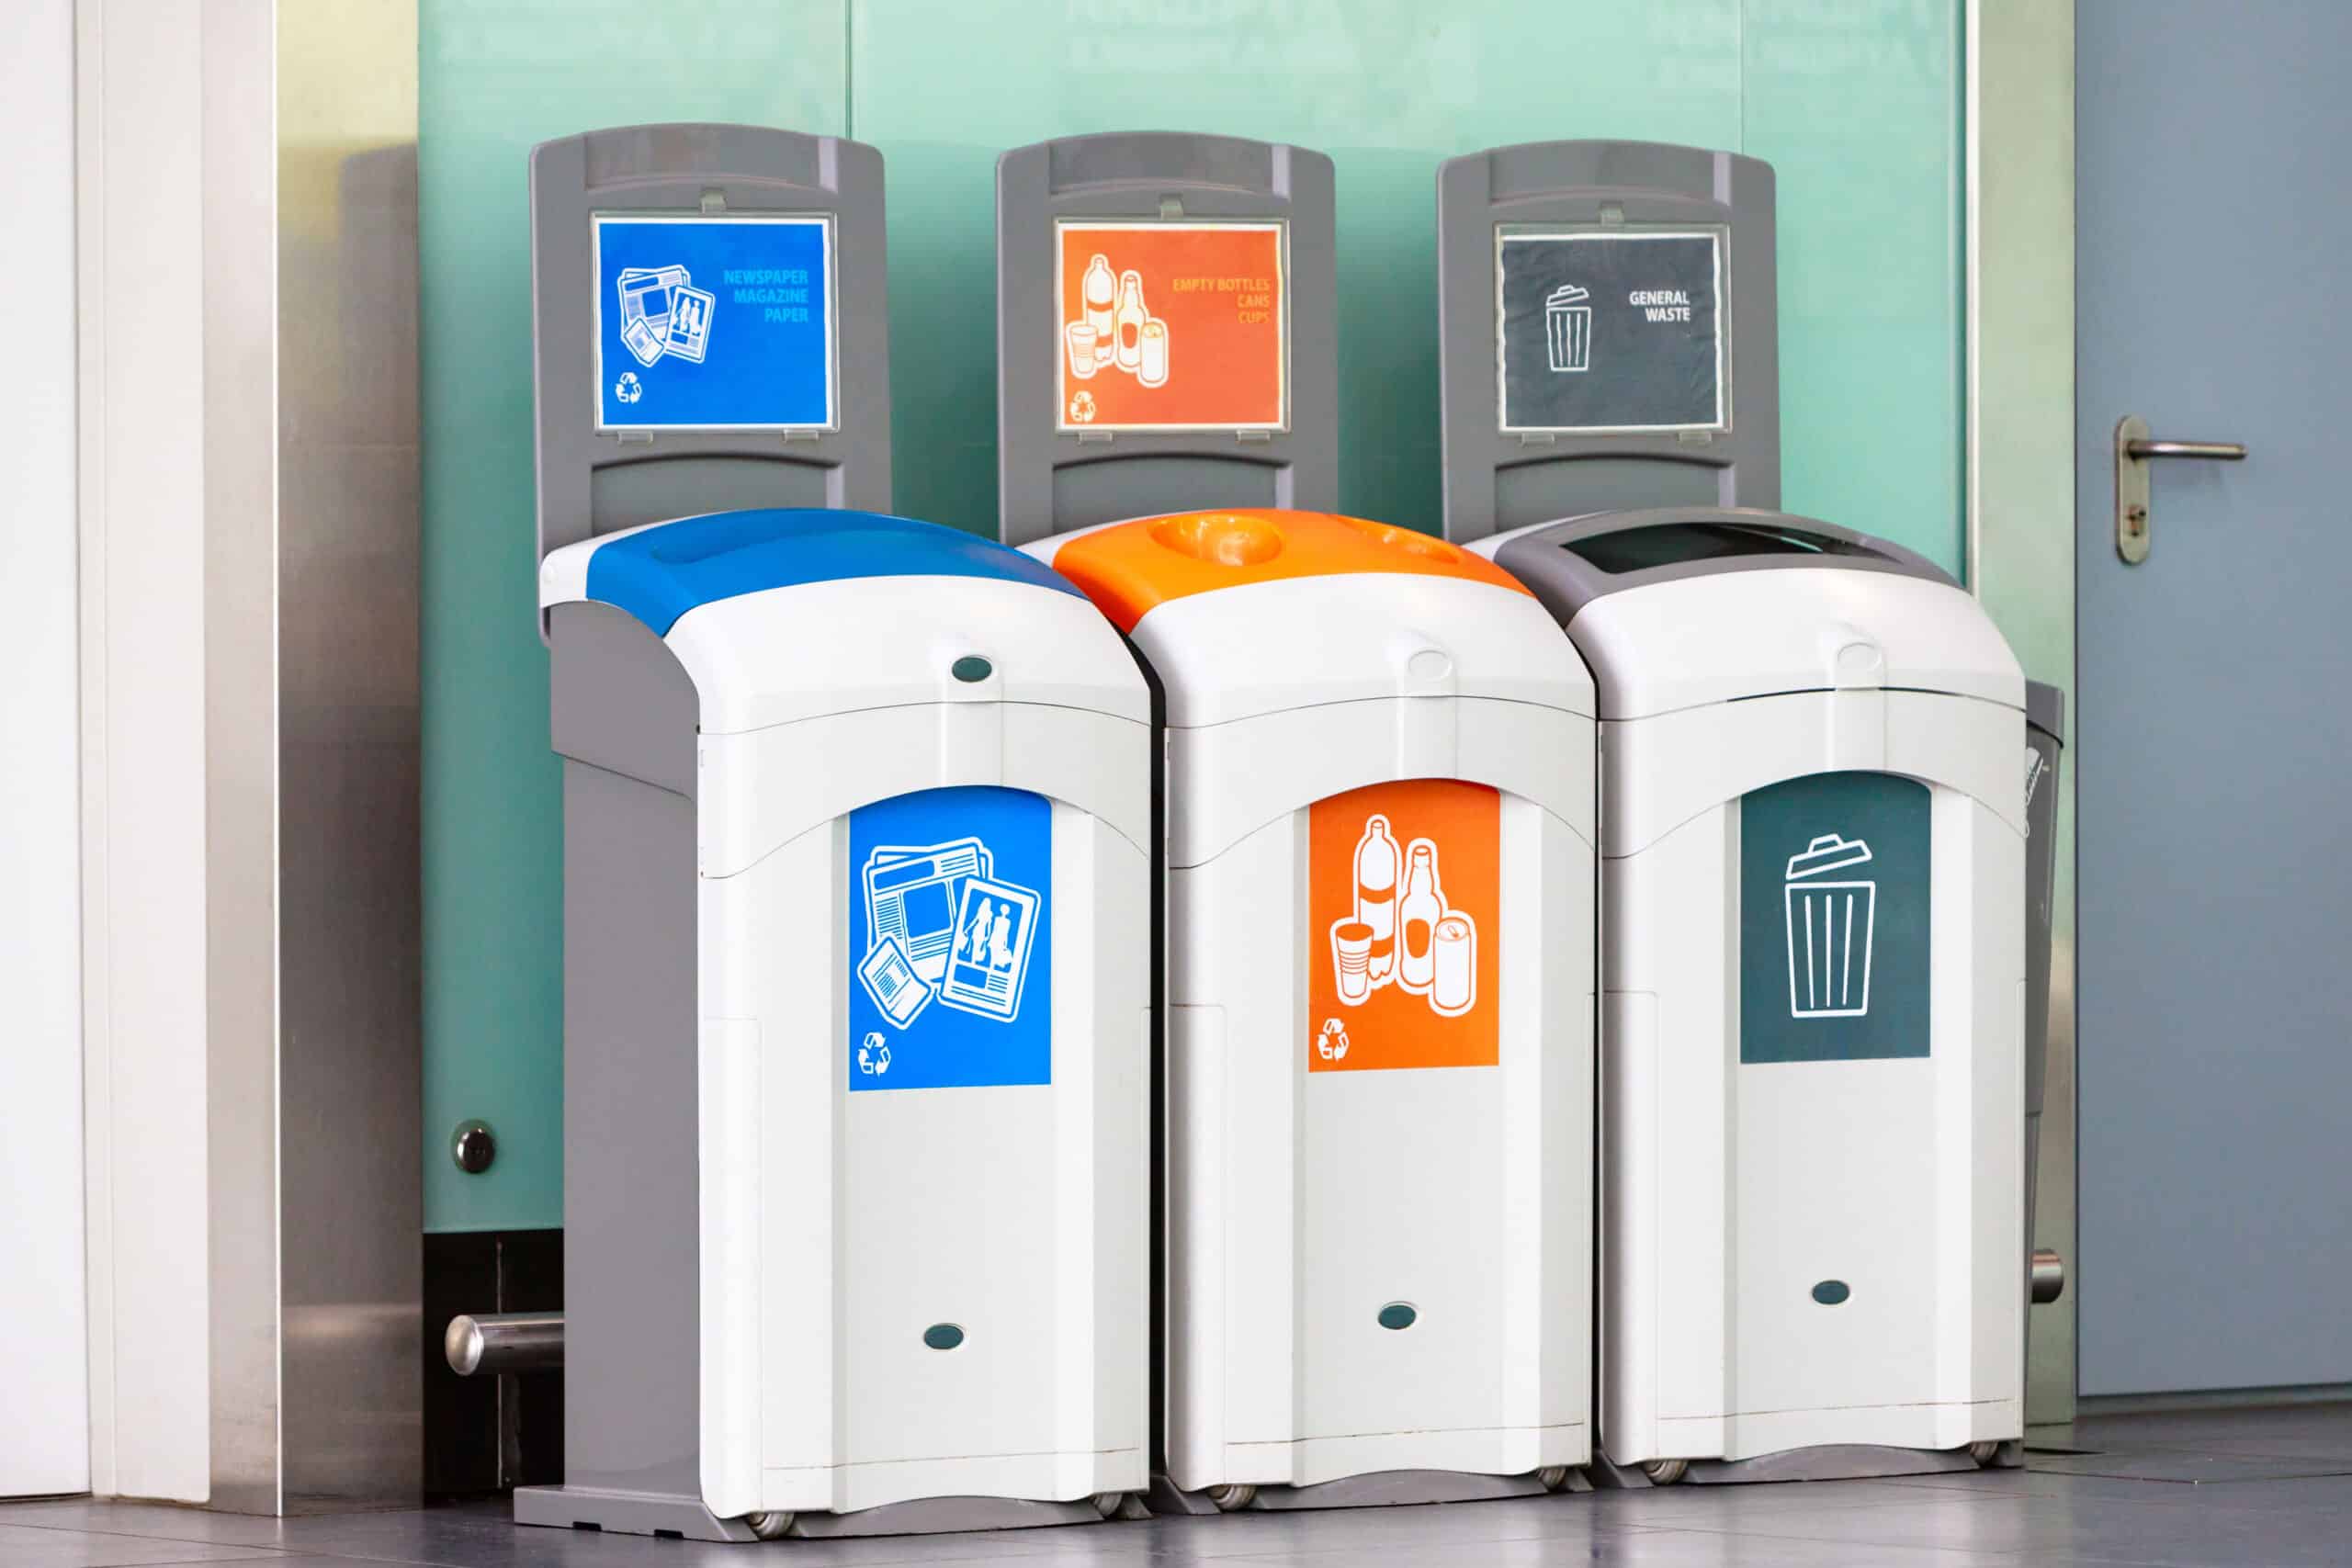 Rubbish bins for different garbage - plastic, empty bottles, newspaper, magazine paper and general waste.